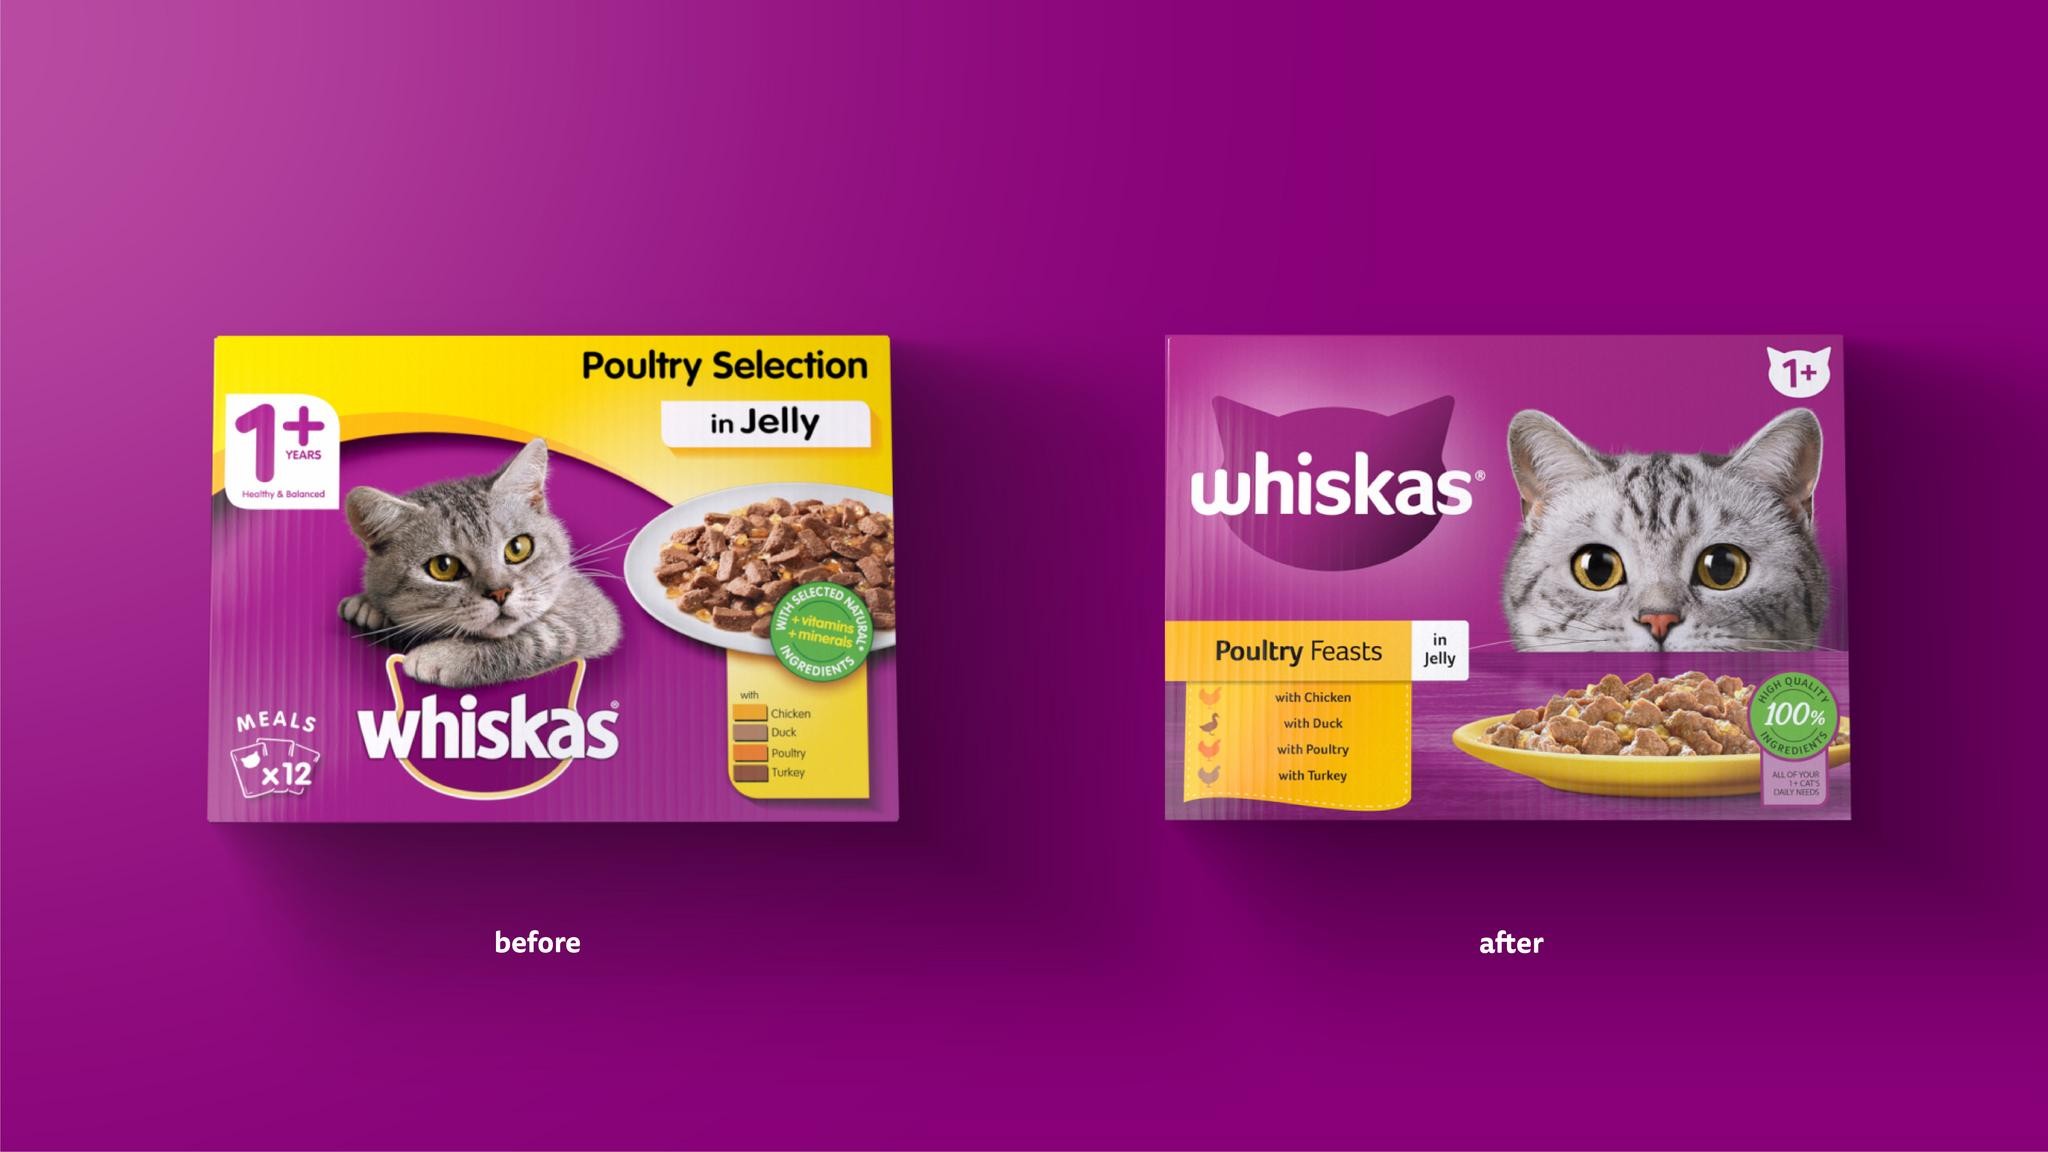 WHISKAS: Bringing Cattitude to the Category